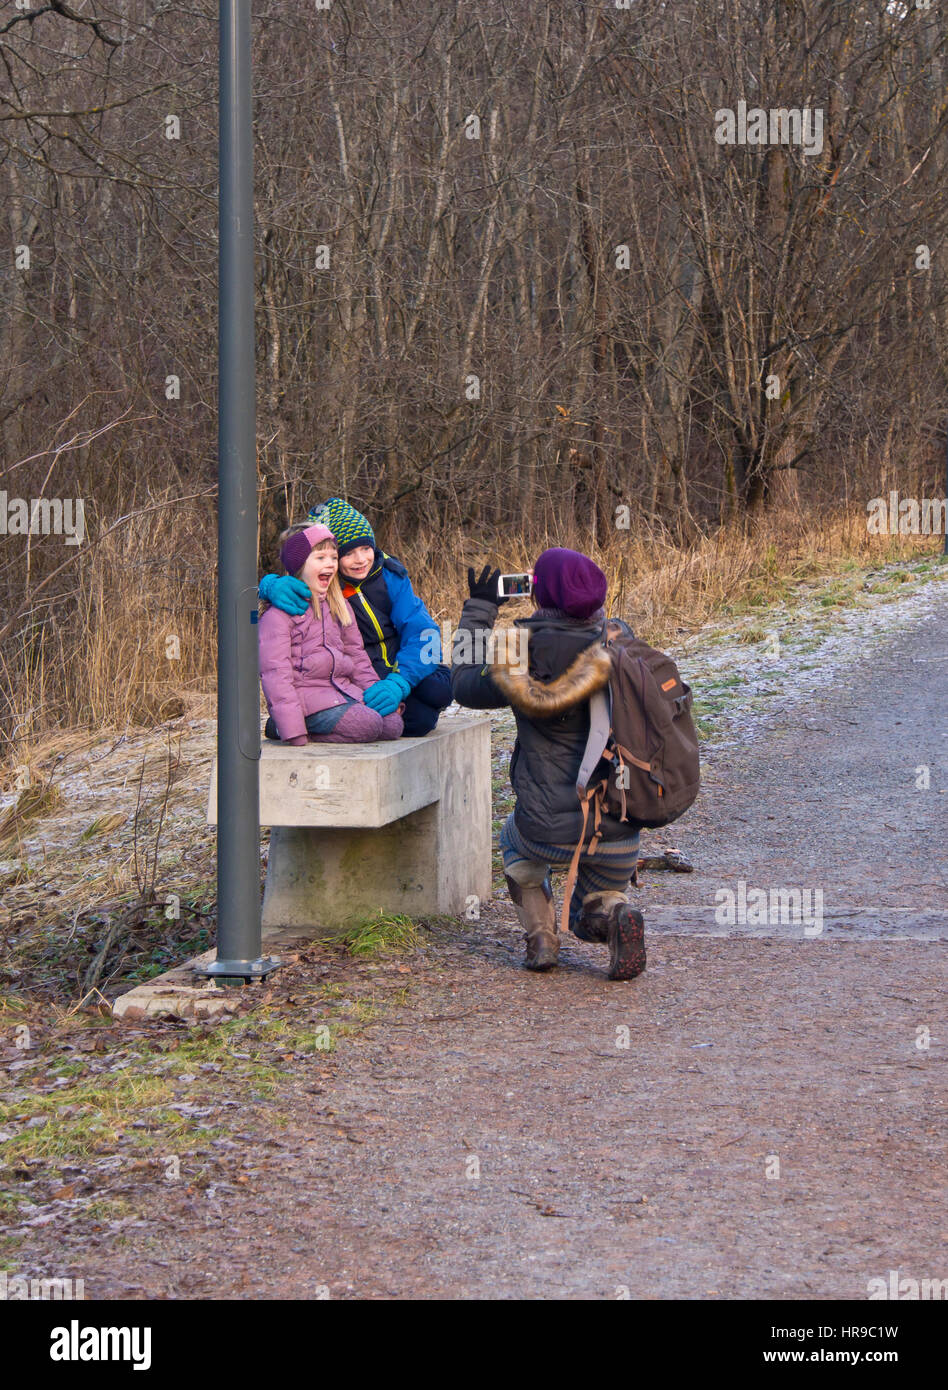 Smartphone photography, mother on a Sunday outing shooting two kids making faces and laughing on a bench in a forest, Oslo Norway Stock Photo